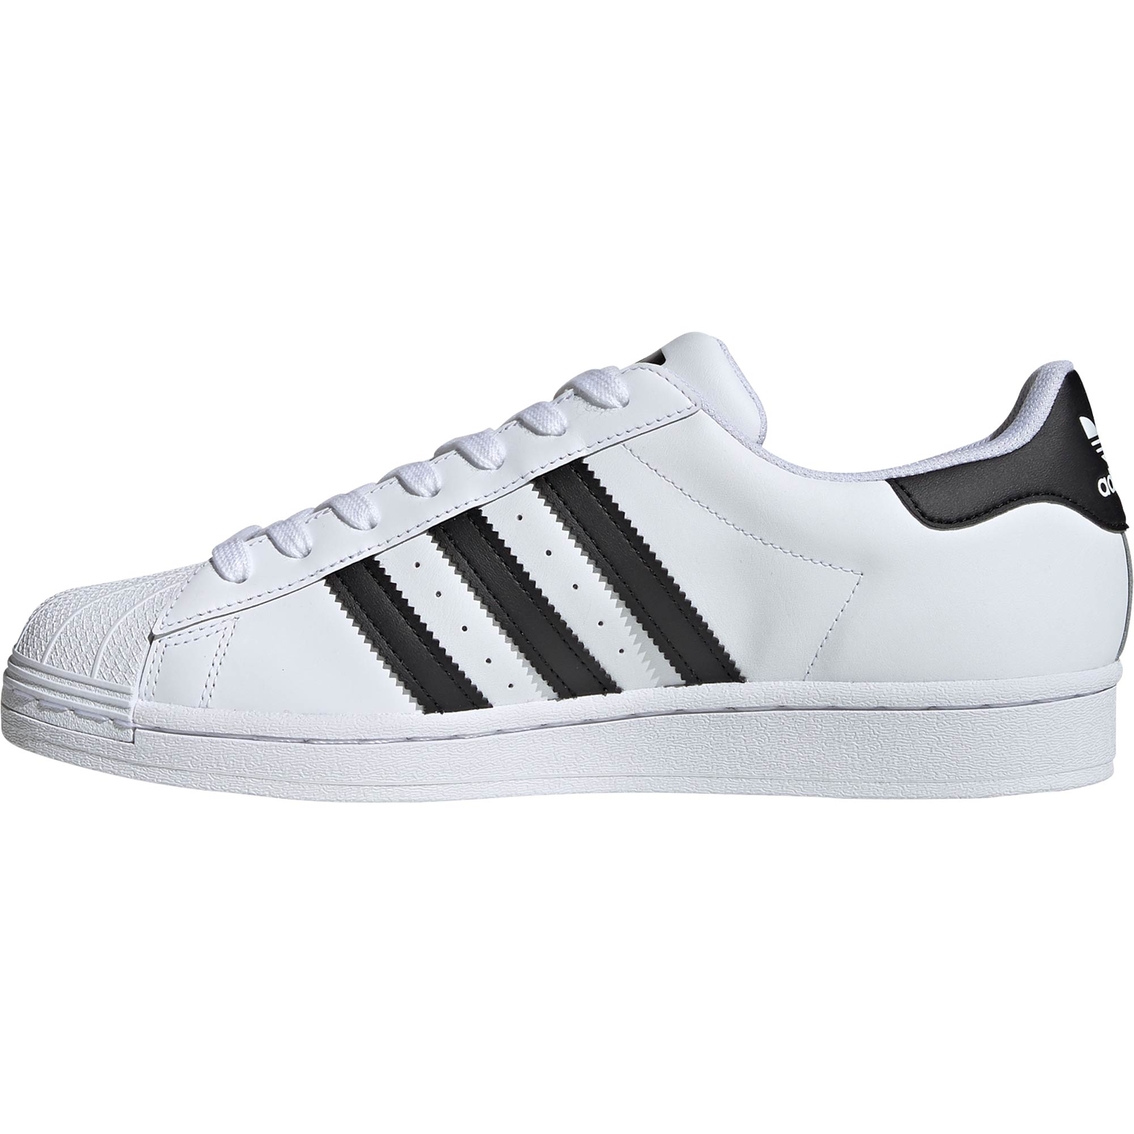 adidas Men's Superstar Shoes - Image 3 of 5